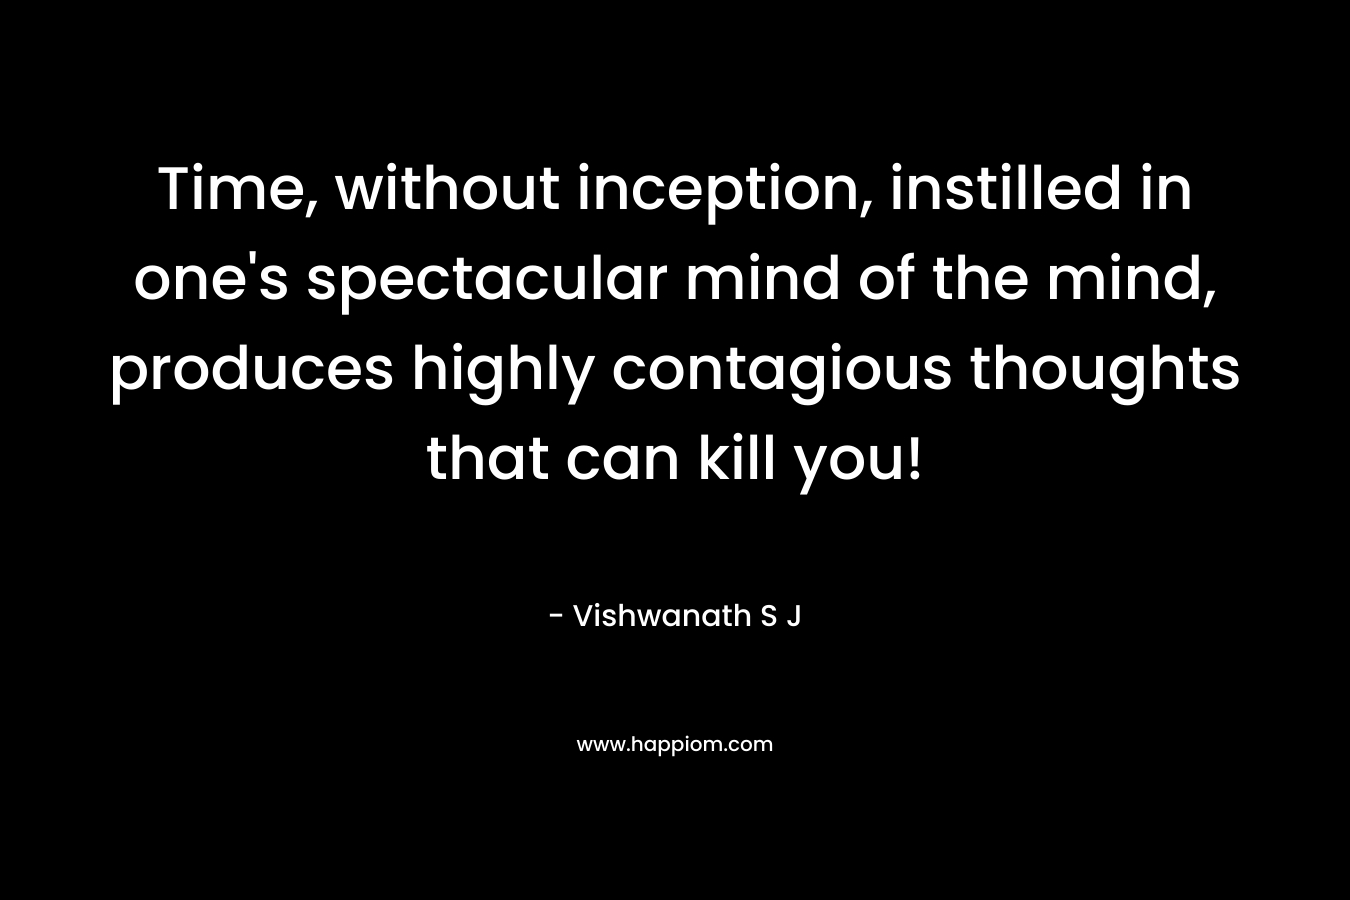 Time, without inception, instilled in one’s spectacular mind of the mind, produces highly contagious thoughts that can kill you! – Vishwanath S J